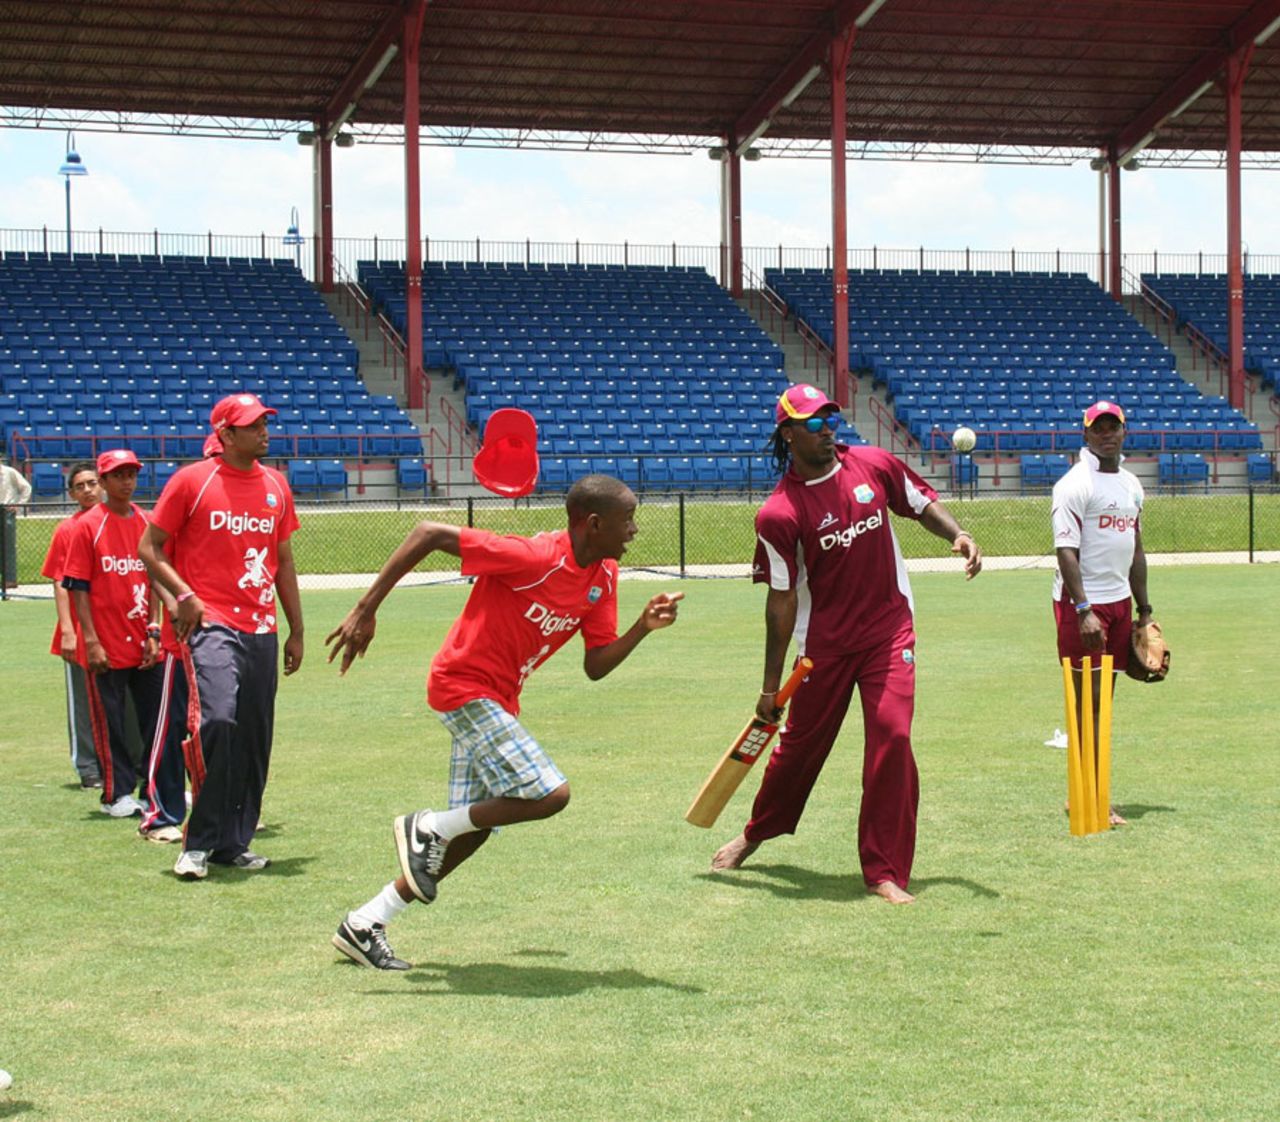 Chris Gayle and Fidel Edwards work with some local youth, Lauderhill, Florida, June 28, 2012